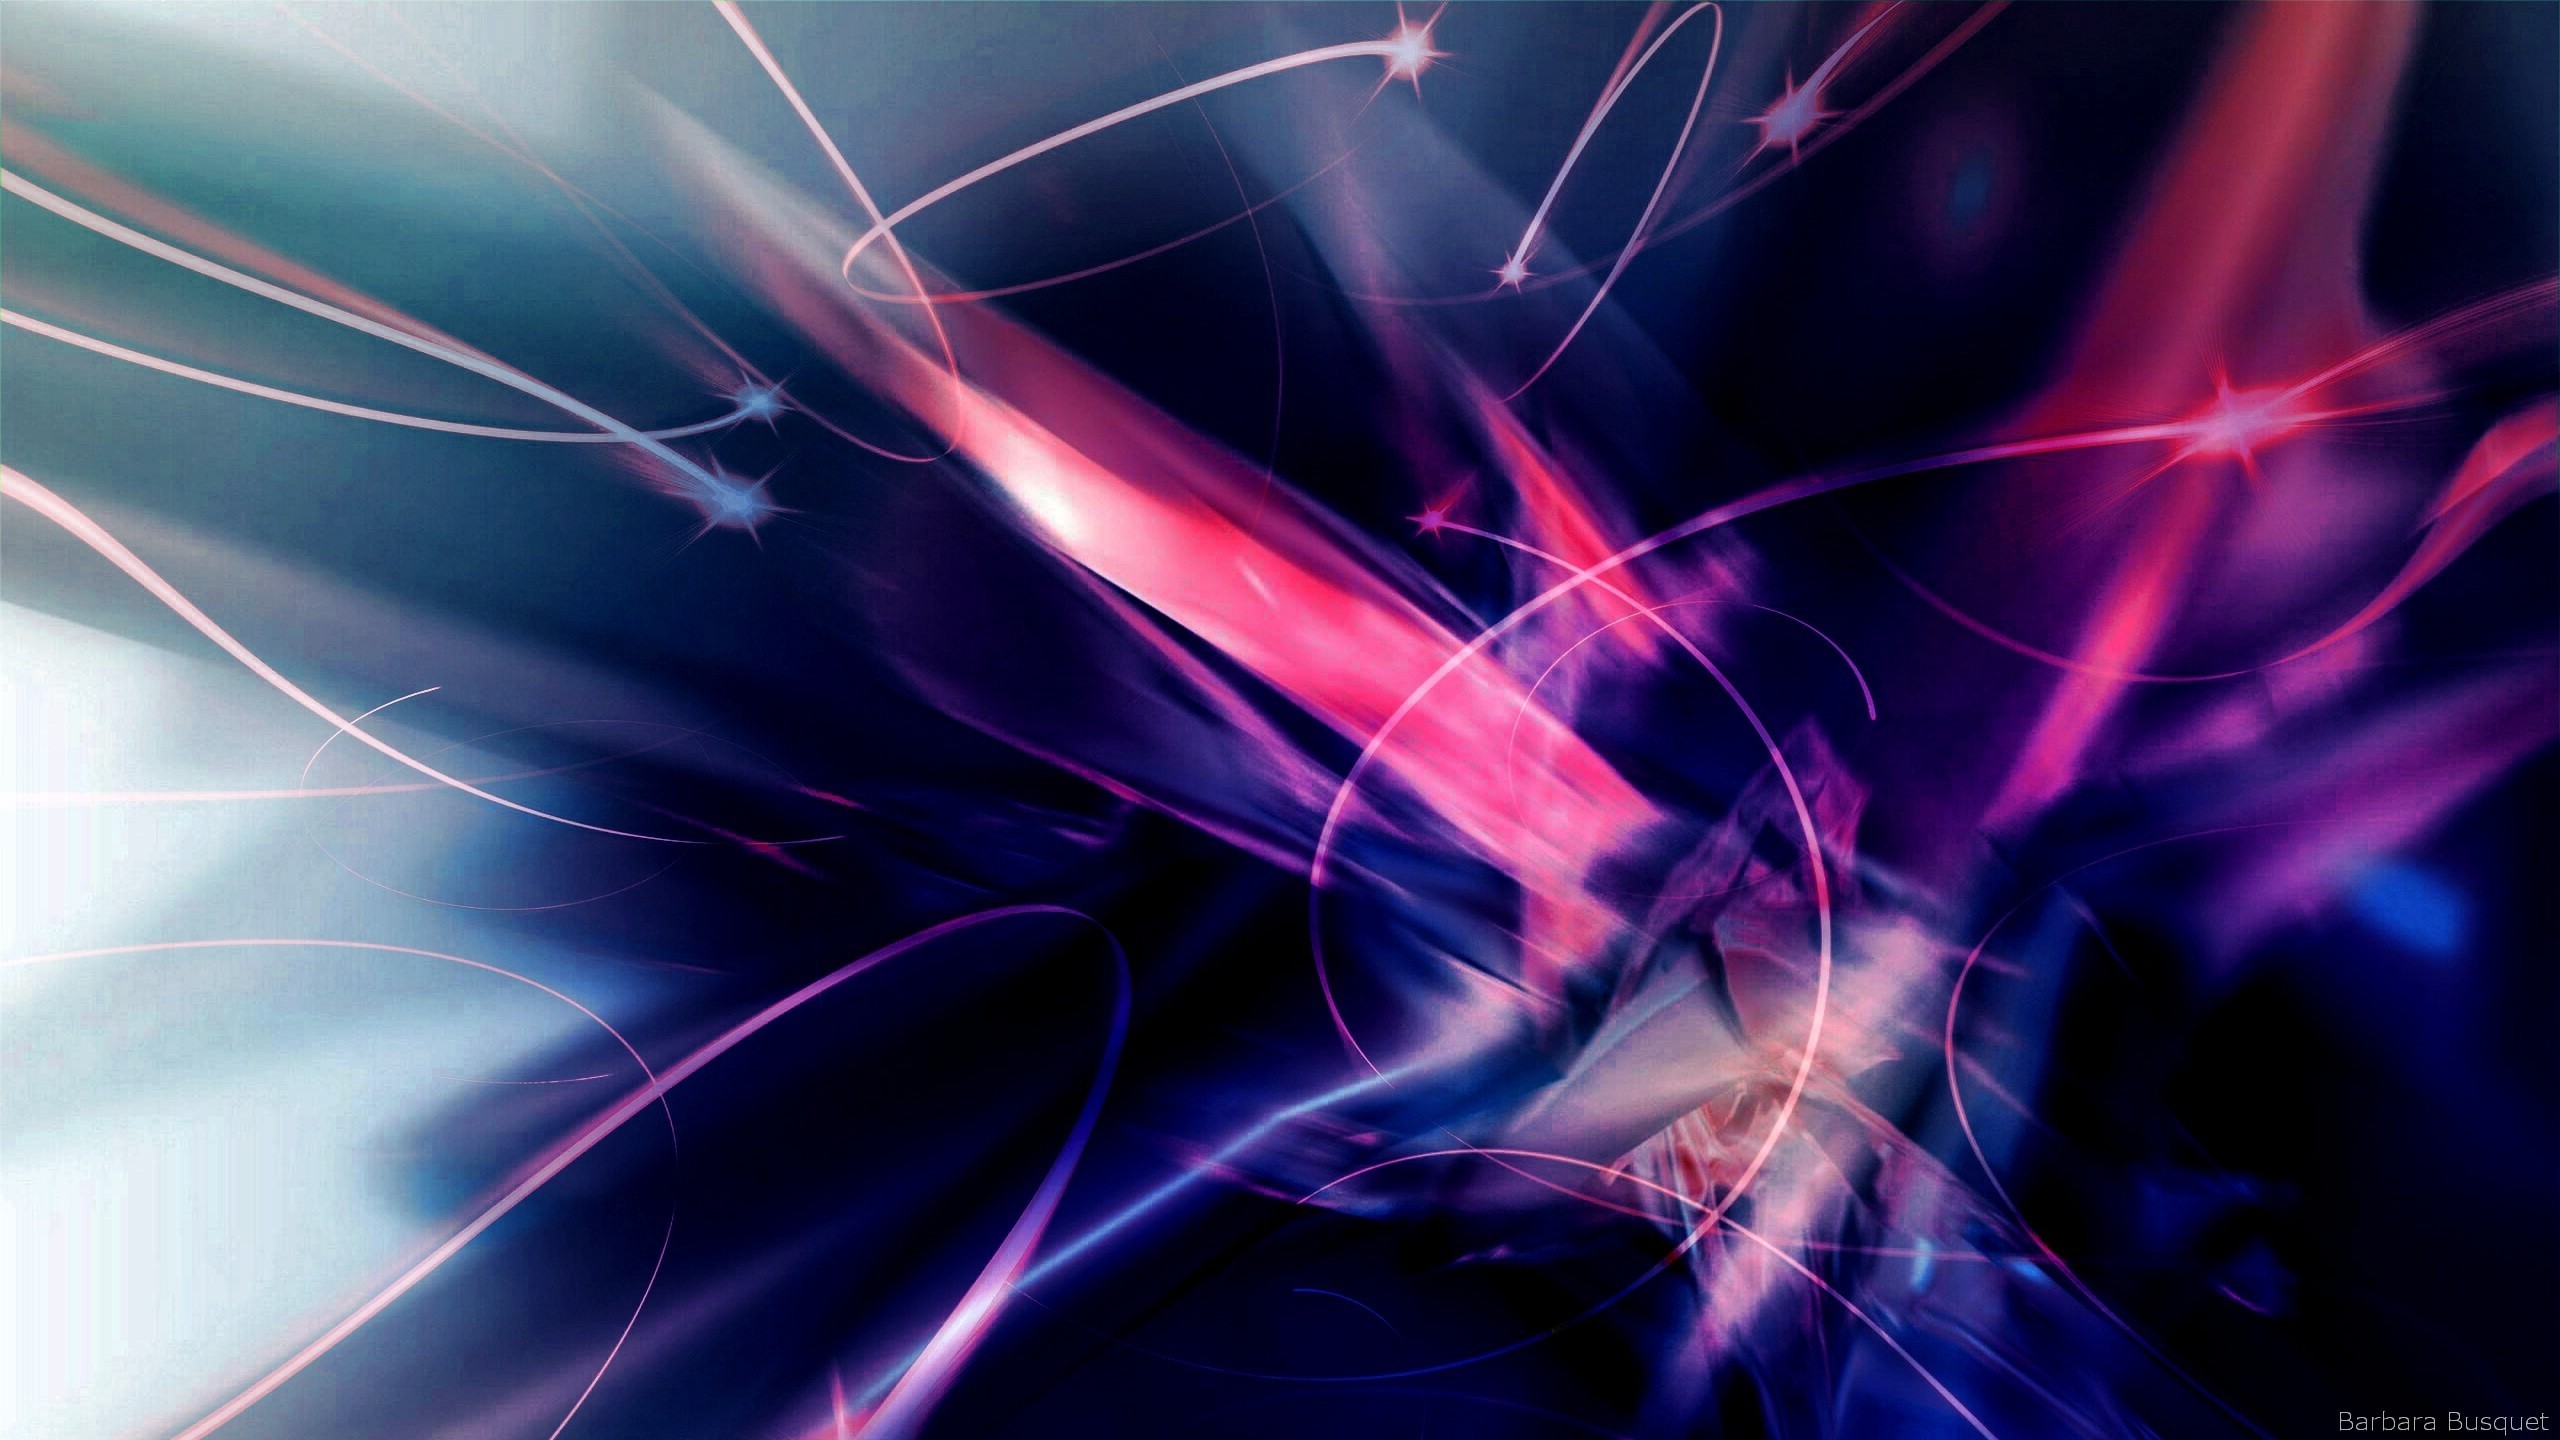 Abstract wallpaper in purple and blue colors